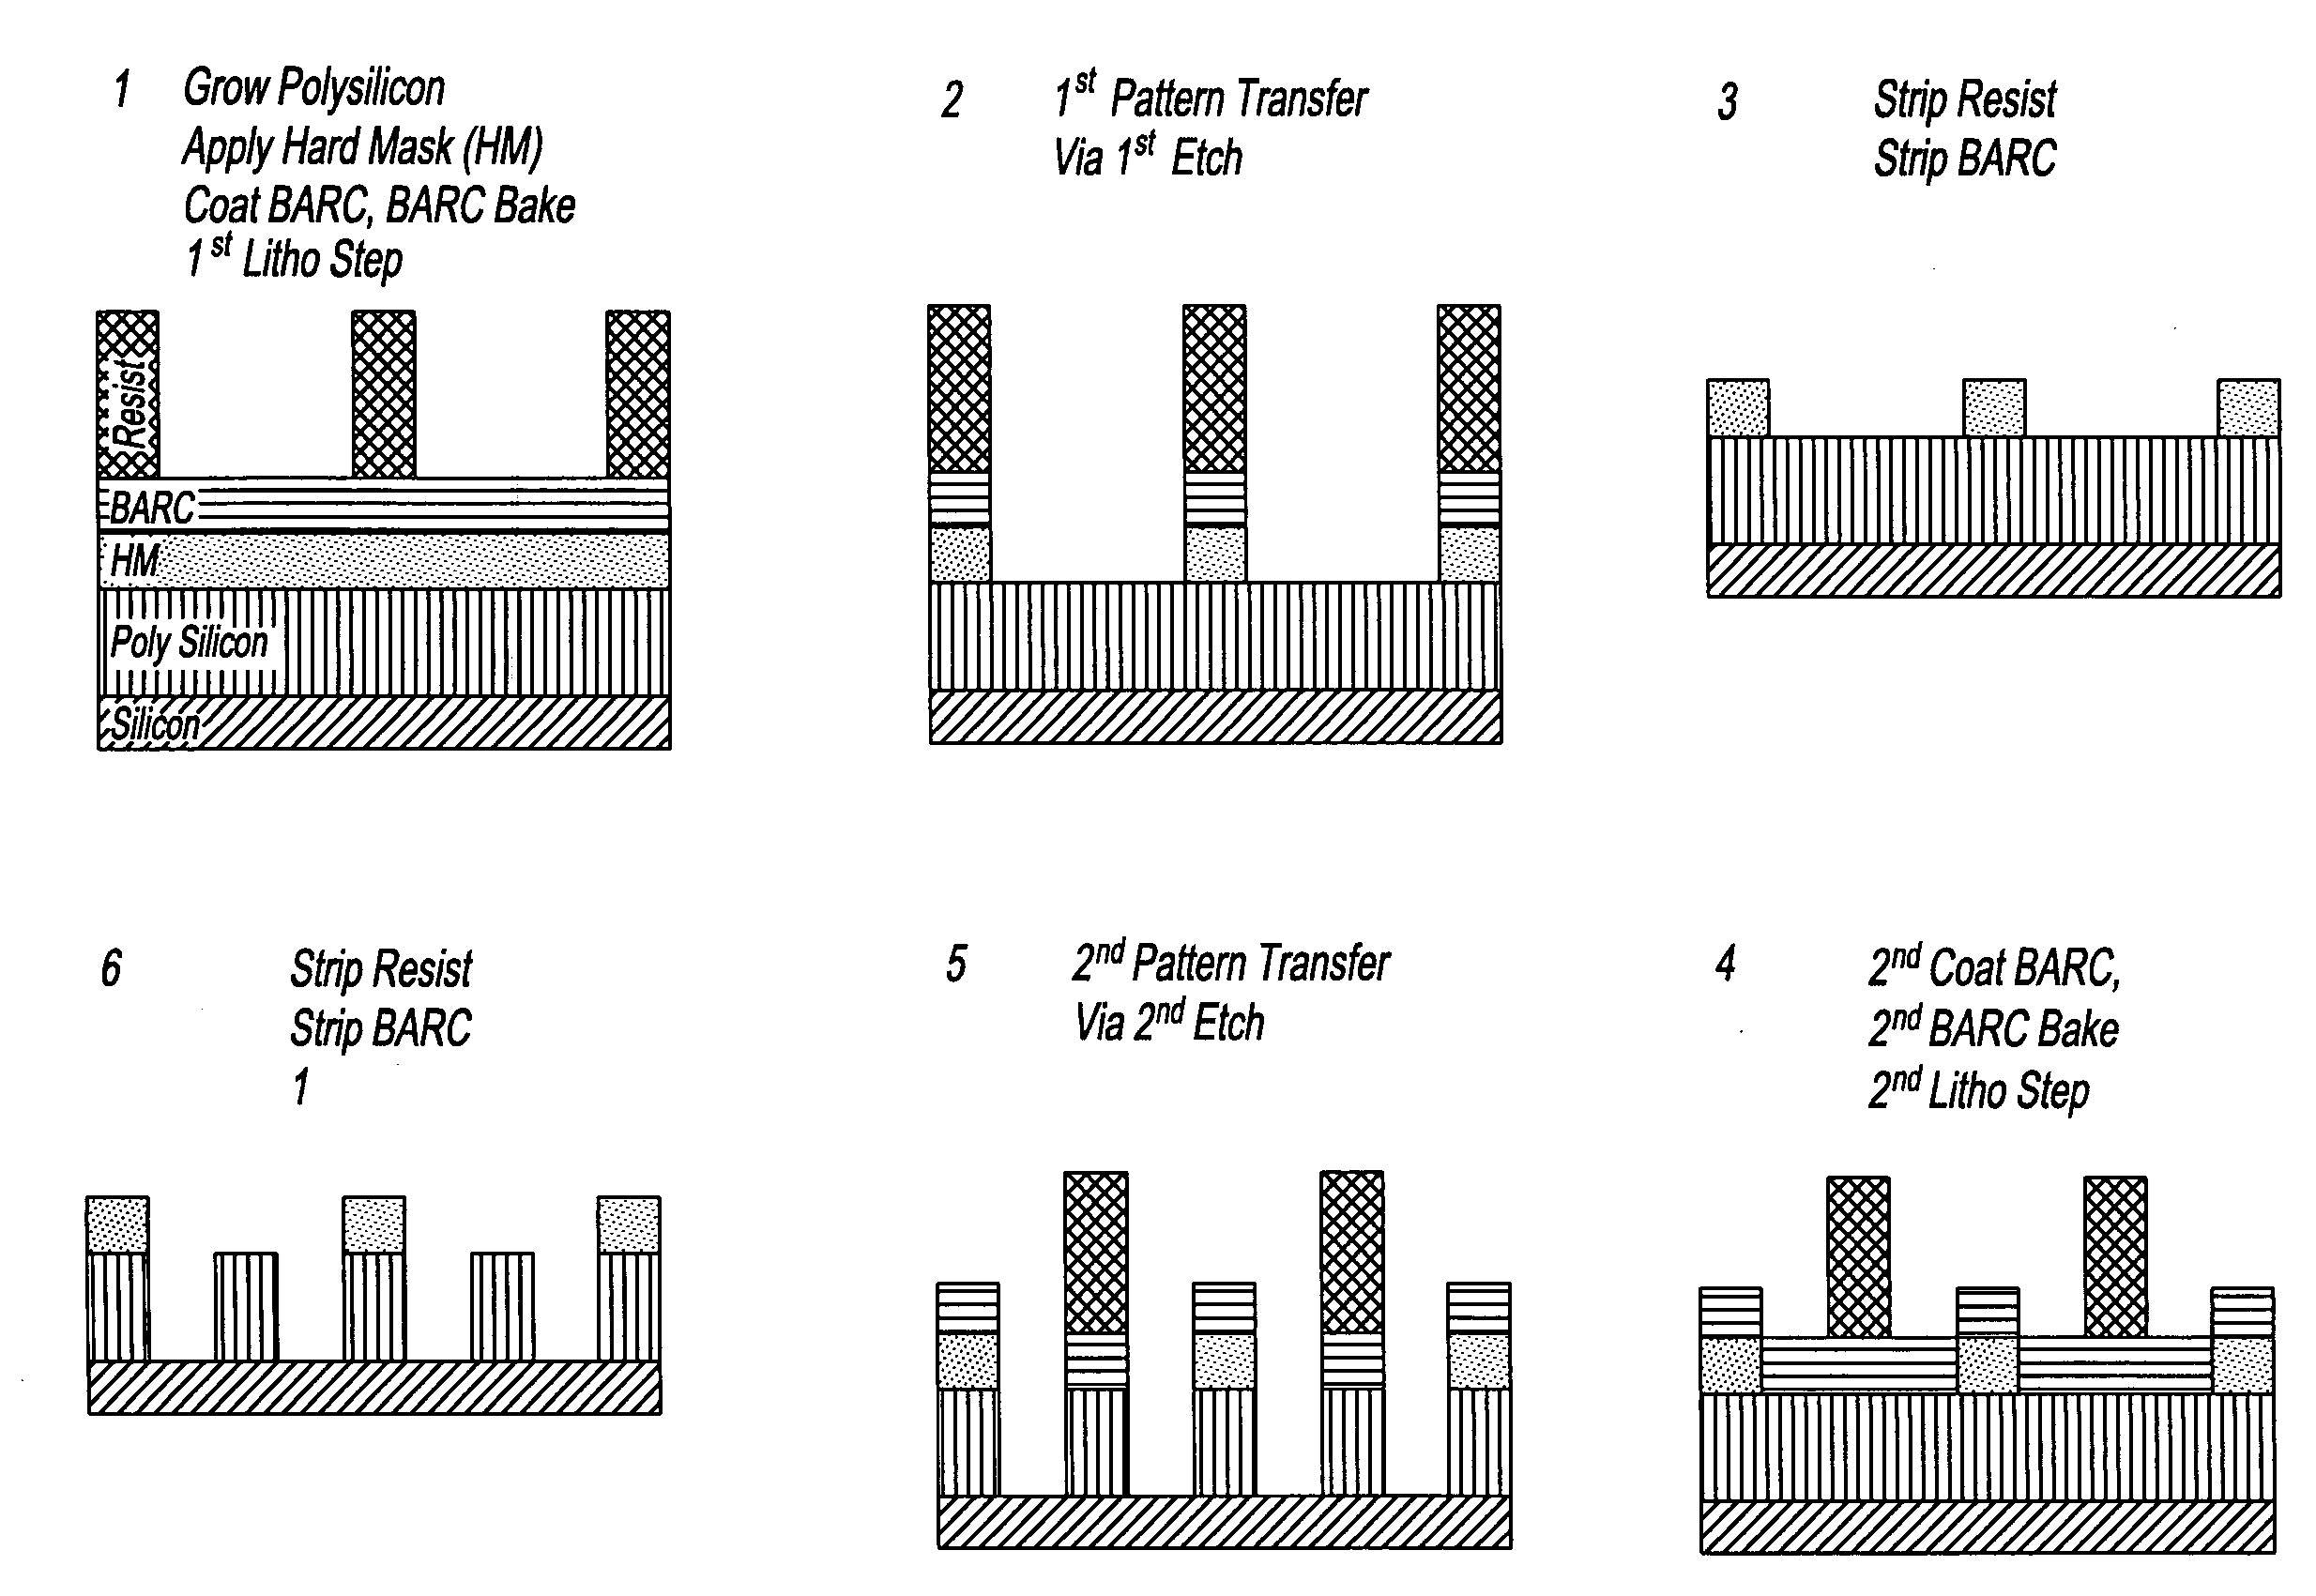 Device manufacturing process utilizing a double patterning process